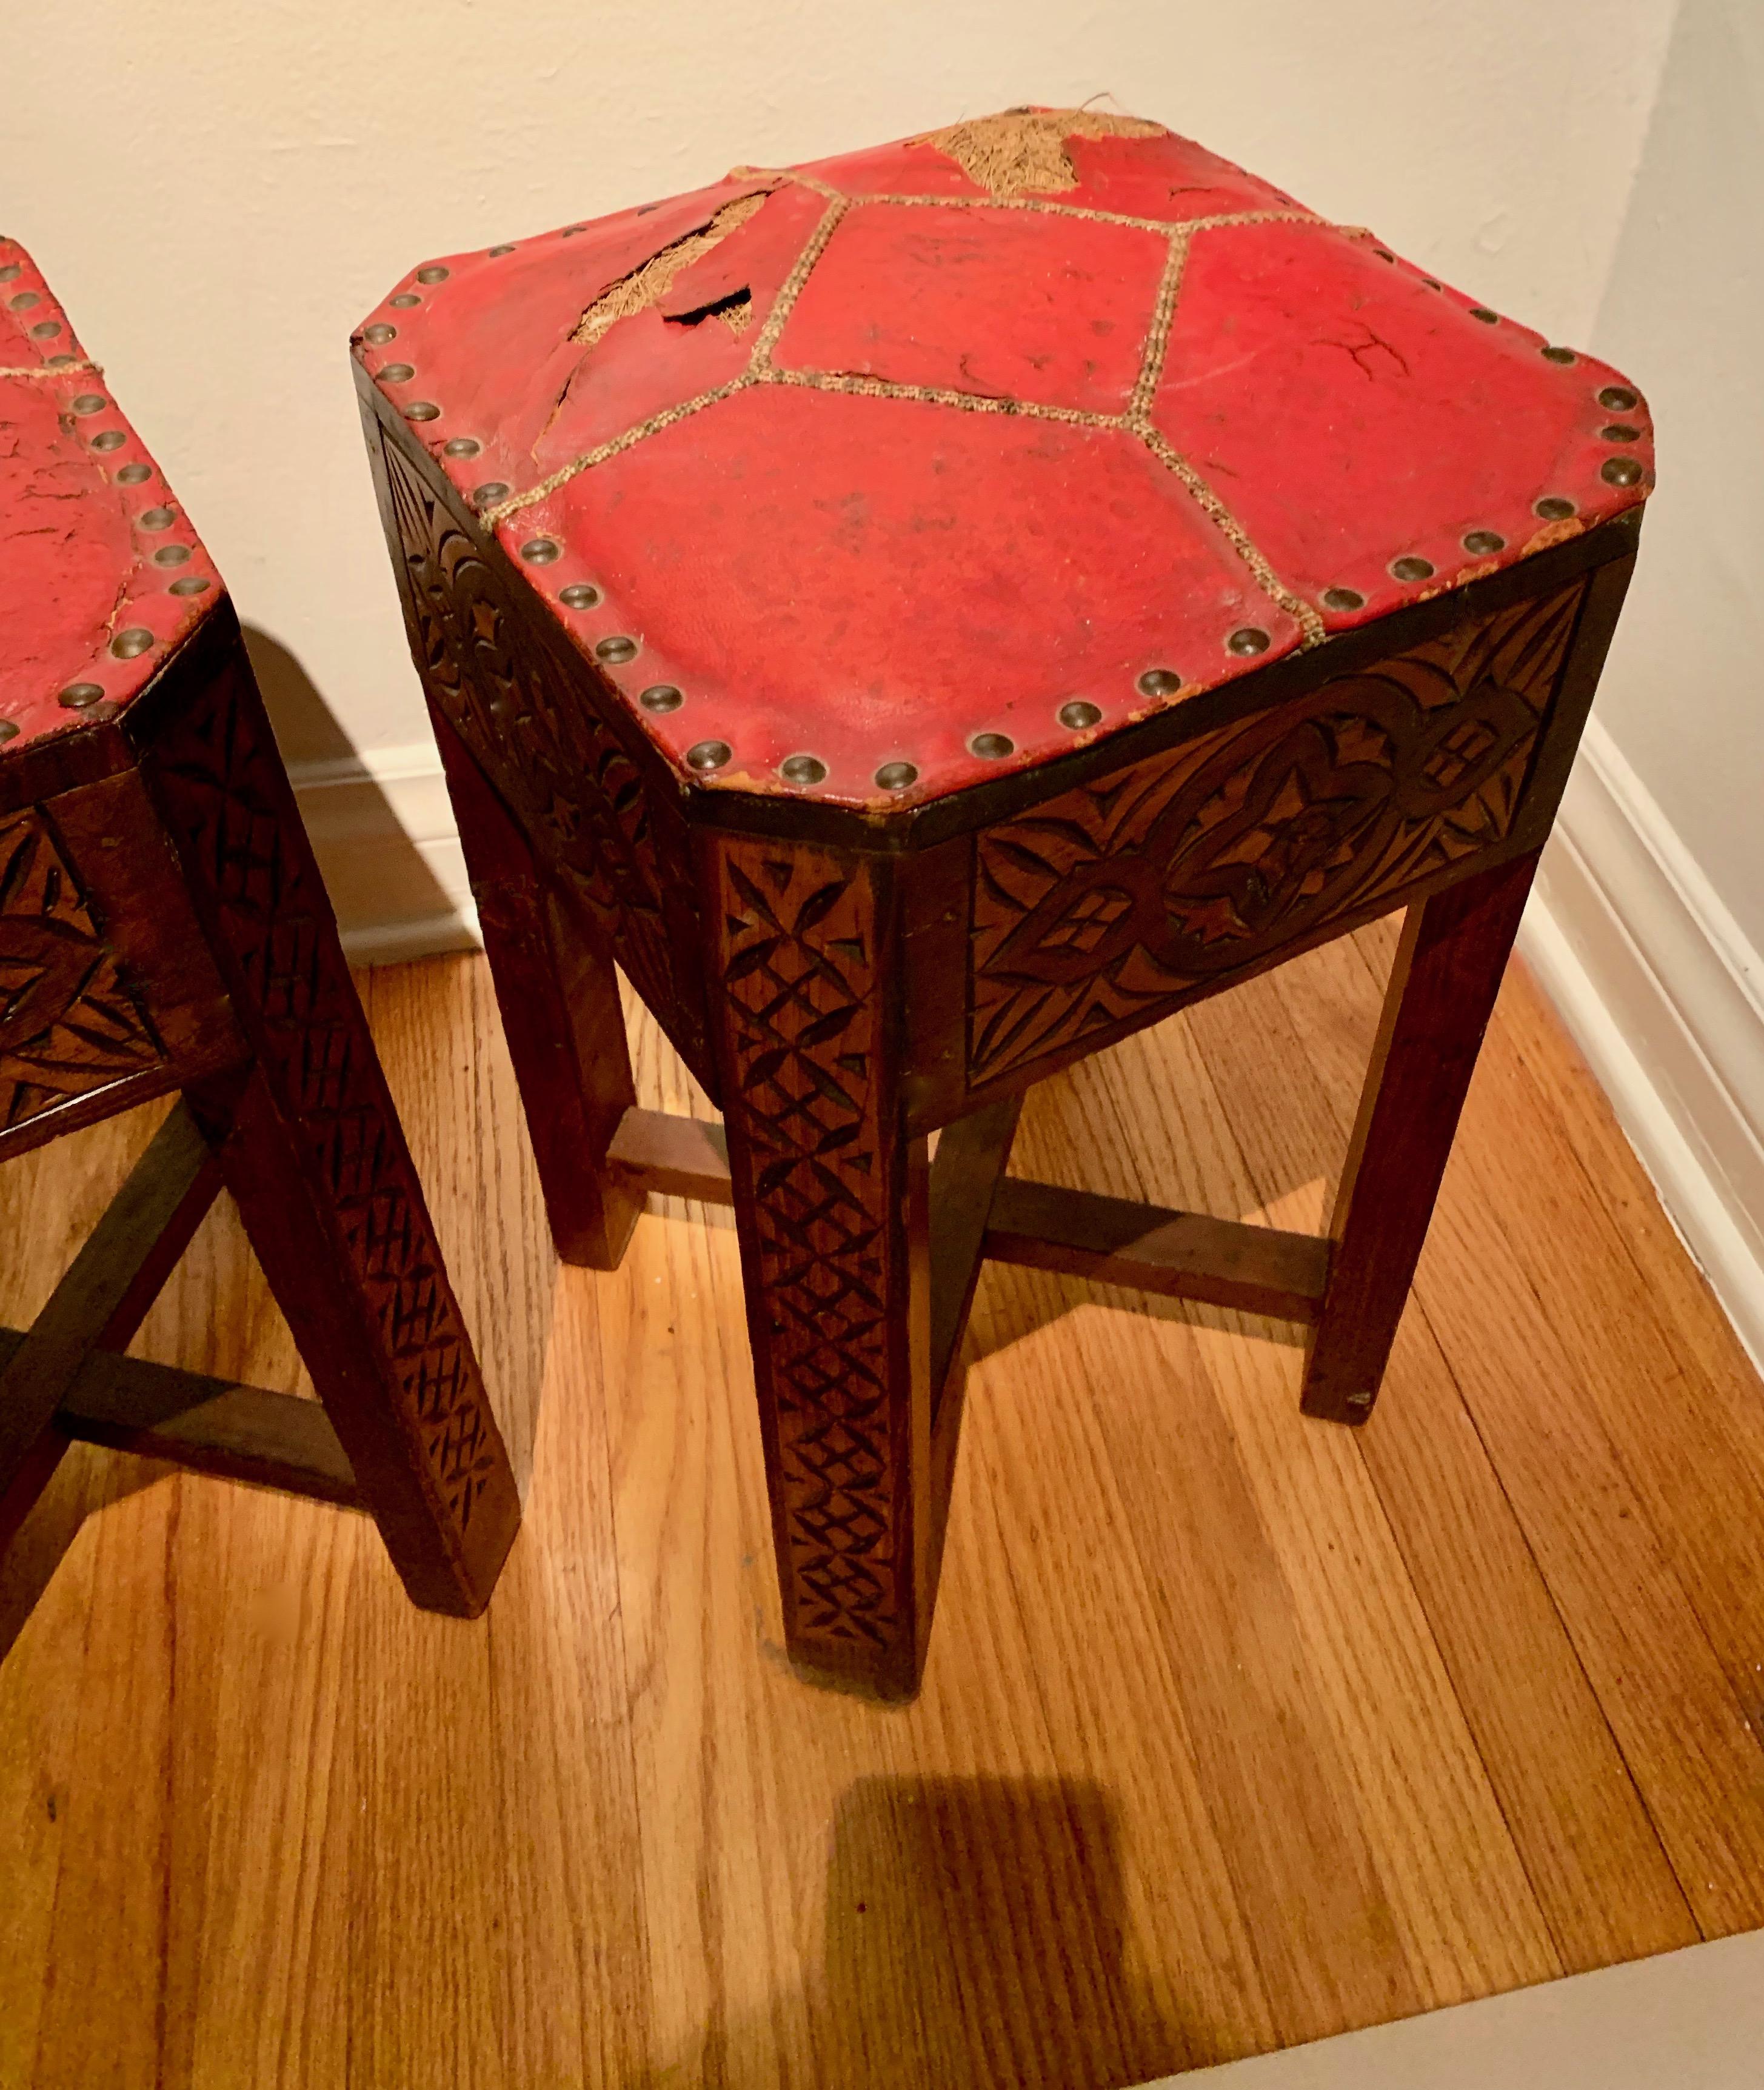 Pair of hand carved Arts & Crafts stools - the unique and rare pair have been kept in the original condition with intricate woven seams. The cracked and patinated red leather has exposed horse hair, suited for the most unique spaces. Well made and